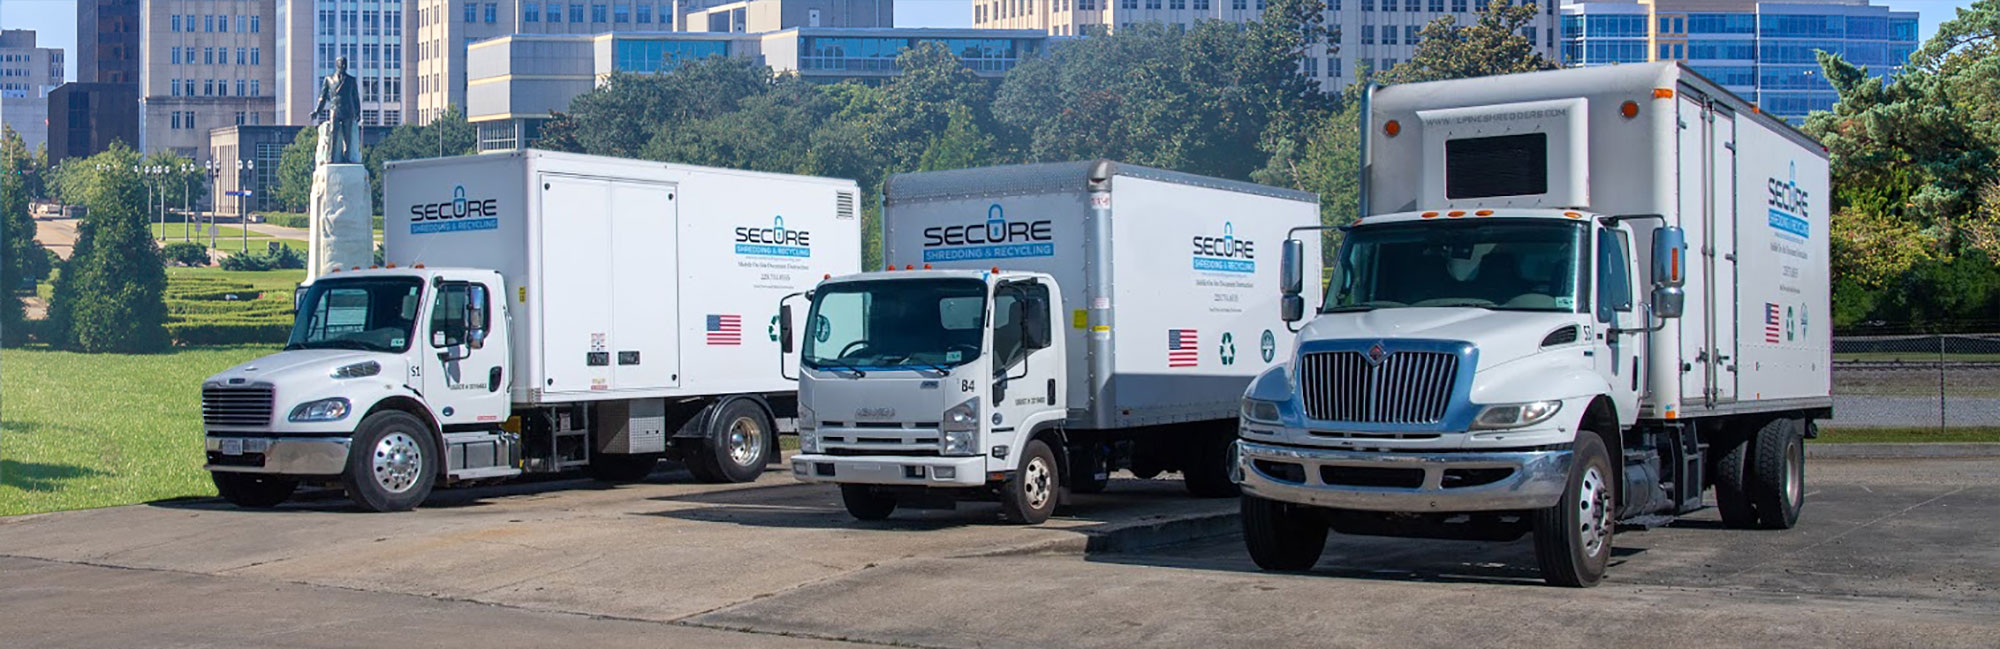 Secure Shredding and Recycling Trucks